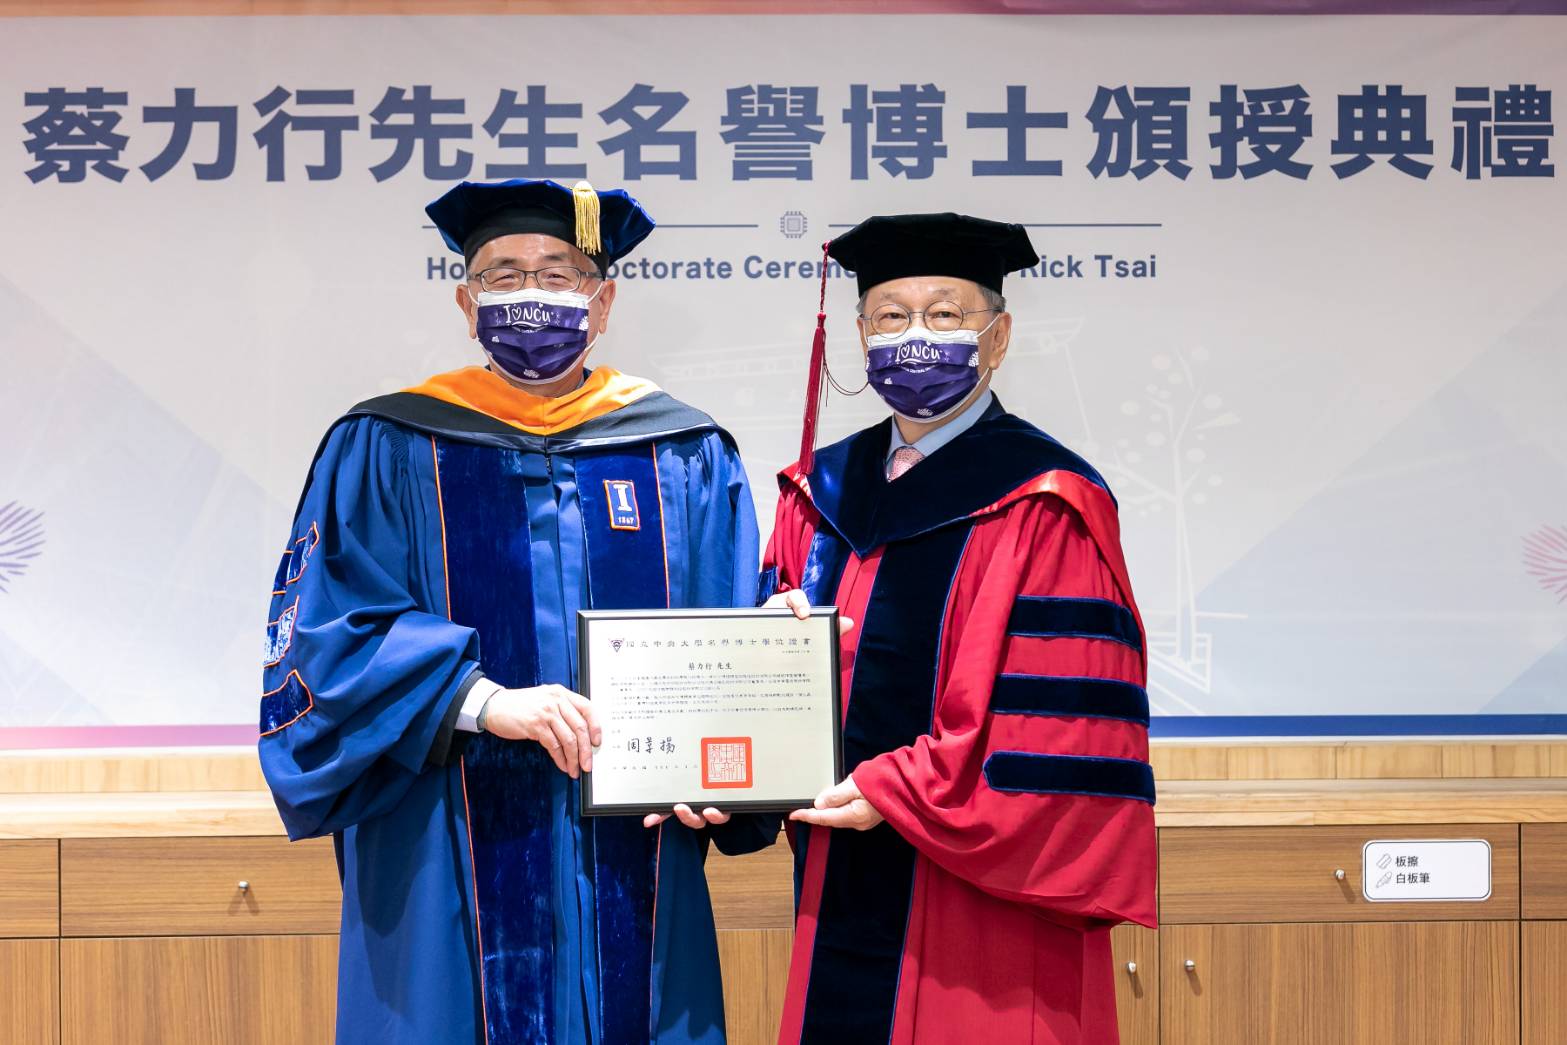 Dr. Rick Tsai (right) receives the NCU Honorary Doctorate certificate from NCU President Dr. Jou Jing-Yang (left).  Photo courtesy: MediaTek Inc.